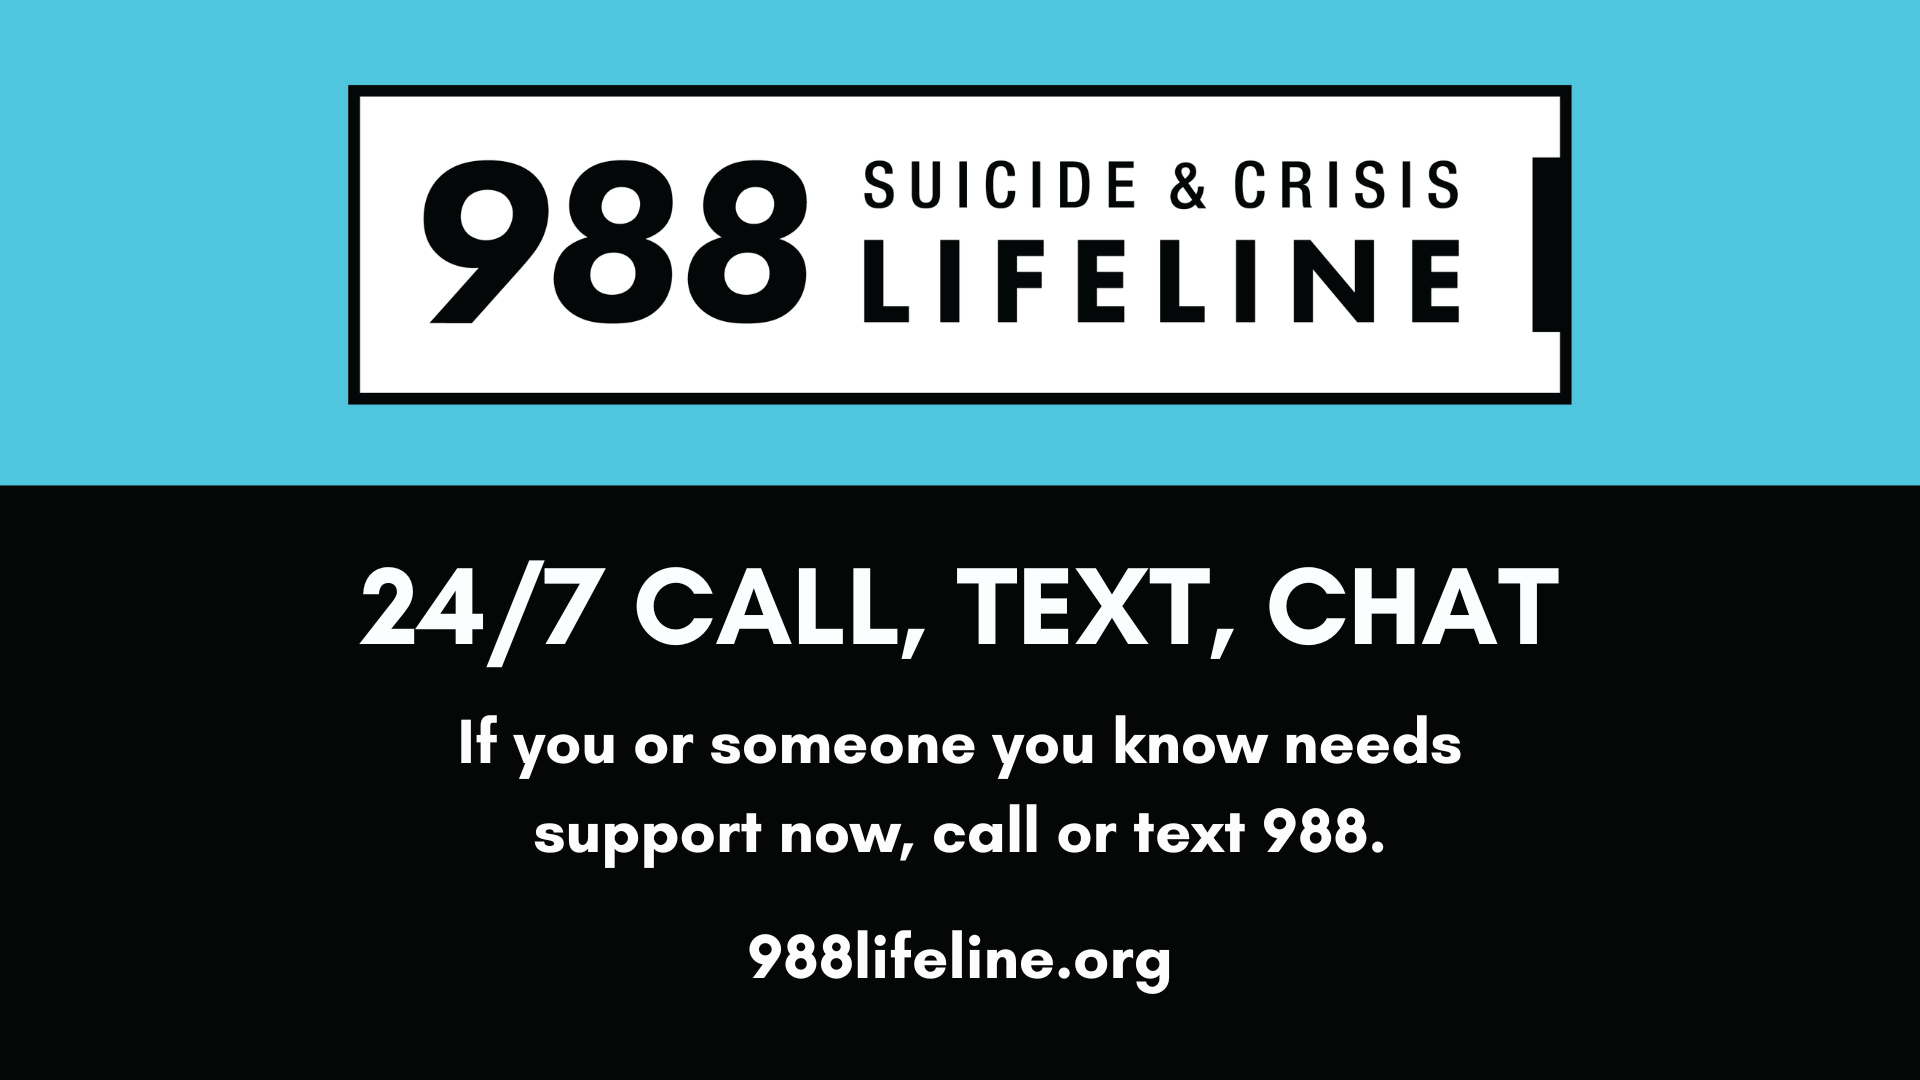 National Suicide and Crisis Lifeline